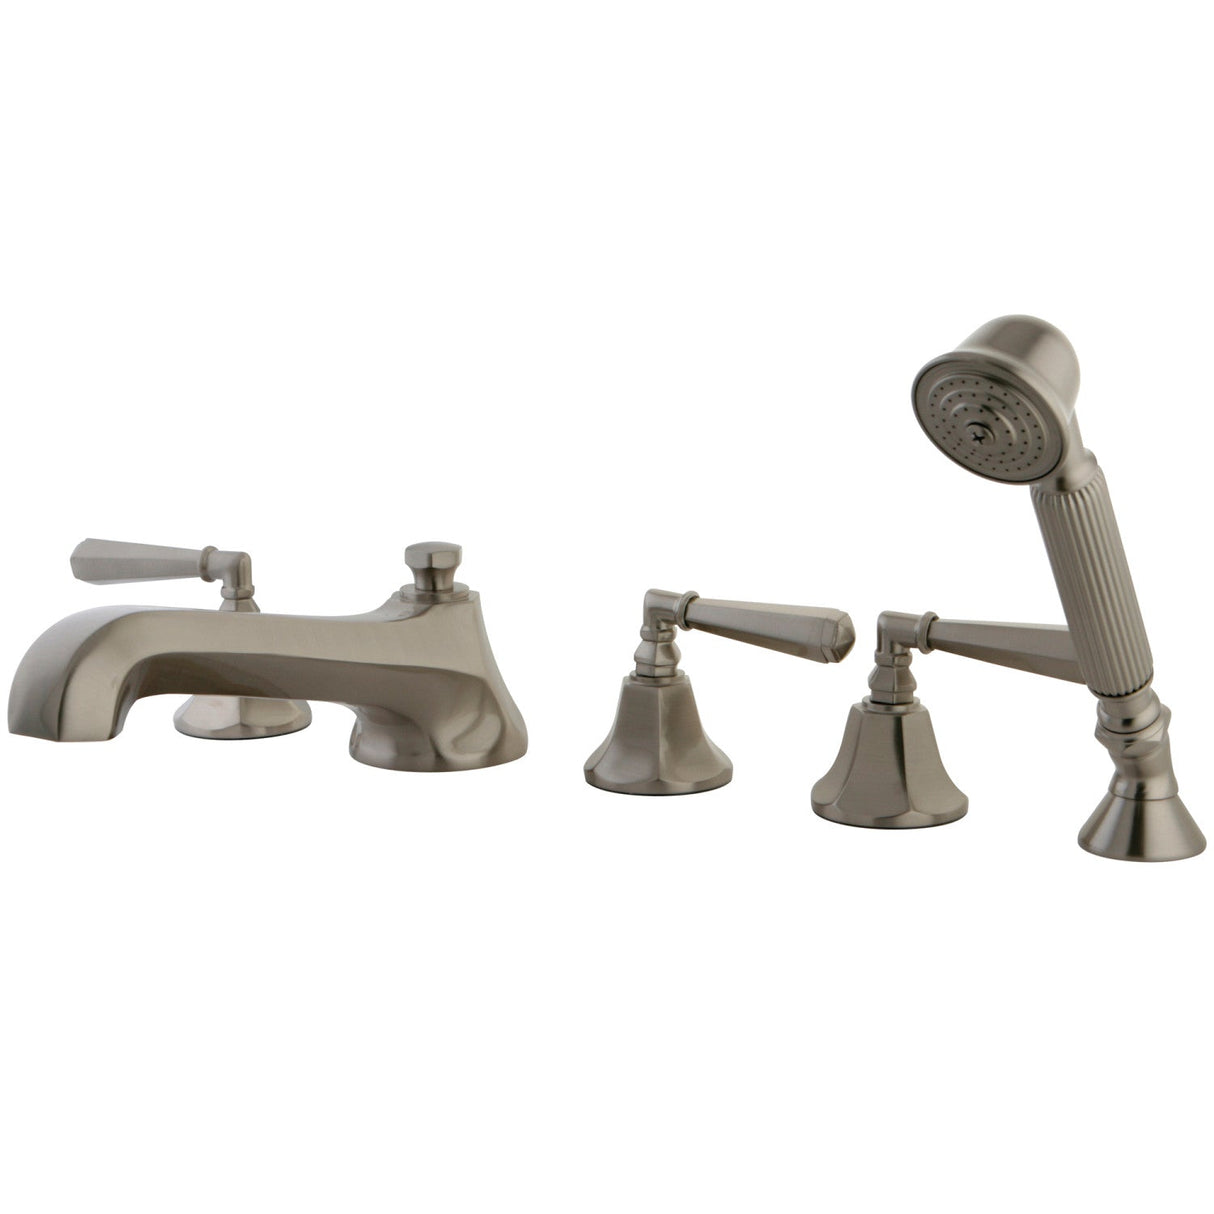 KS43085HL Three-Handle 5-Hole Deck Mount Roman Tub Faucet with Hand Shower, Brushed Nickel